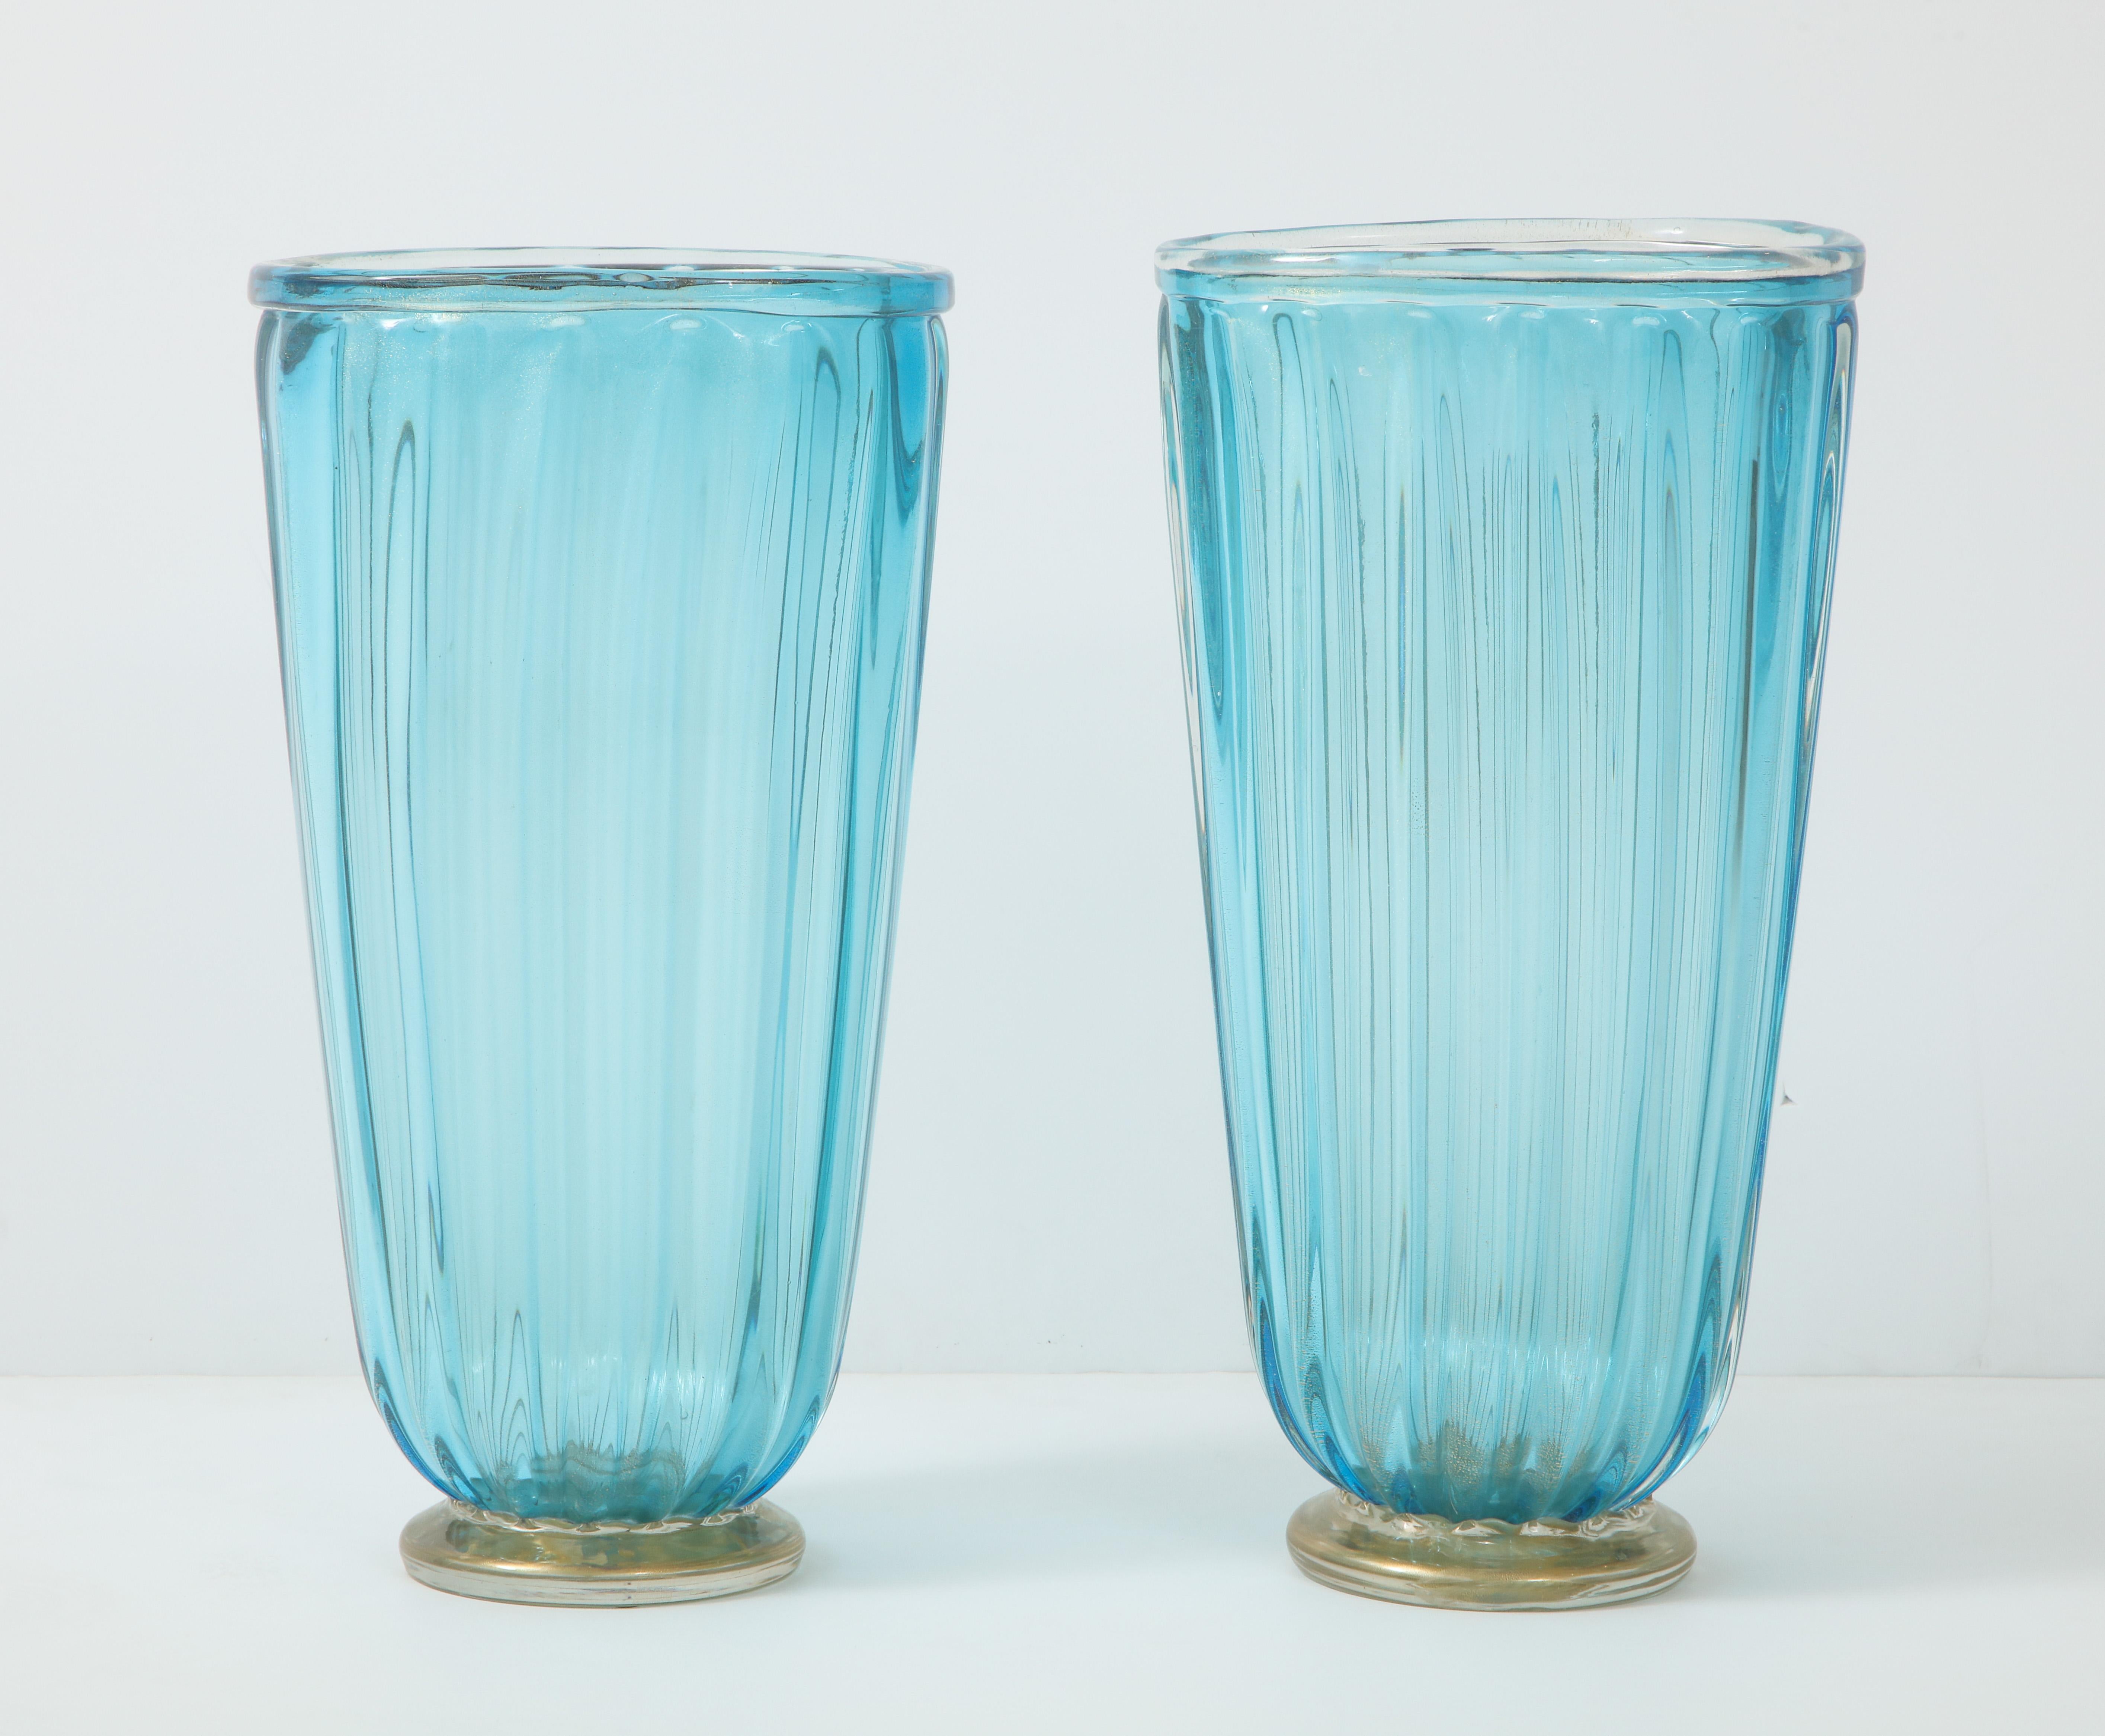 A pair of Murano glass vases in a stunning shade of blue. The round, fluted vases have a round base with gold leaf infusions. Perfect on their own or holding branches or flowers.